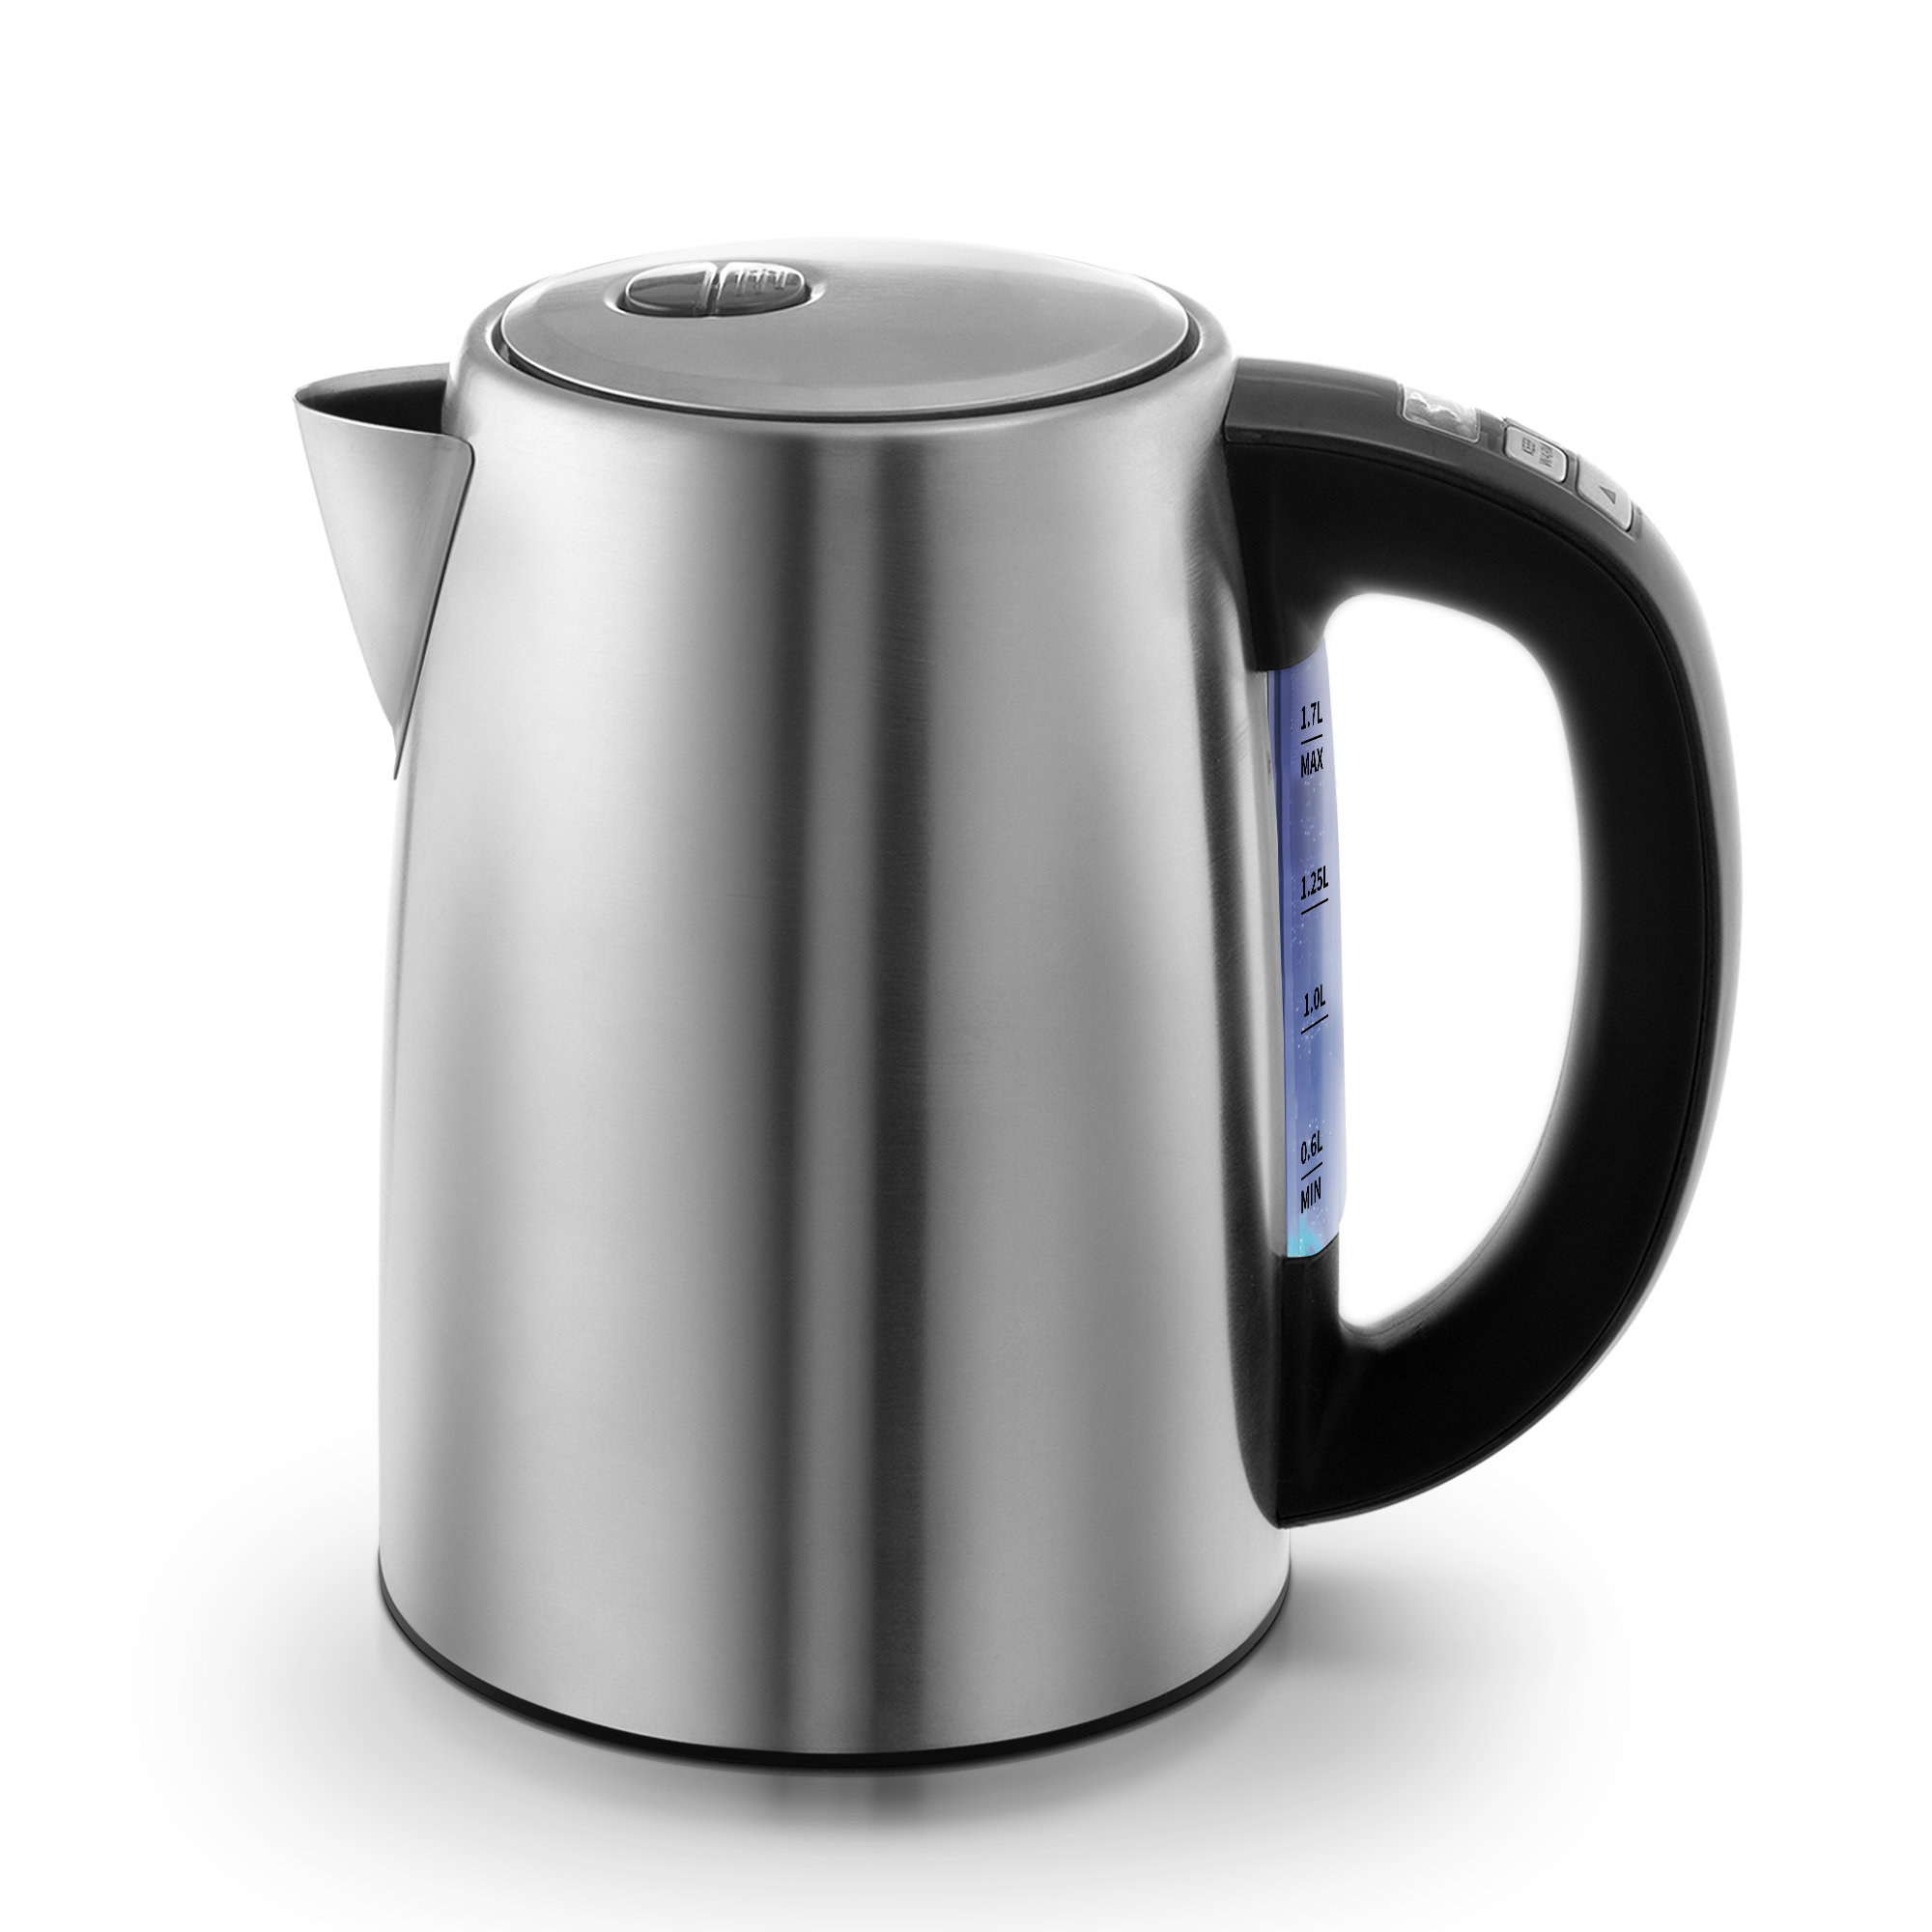 Kenmore 1.7 L (1.8 qt) Digital Cordless Kettle - Stainless Steel